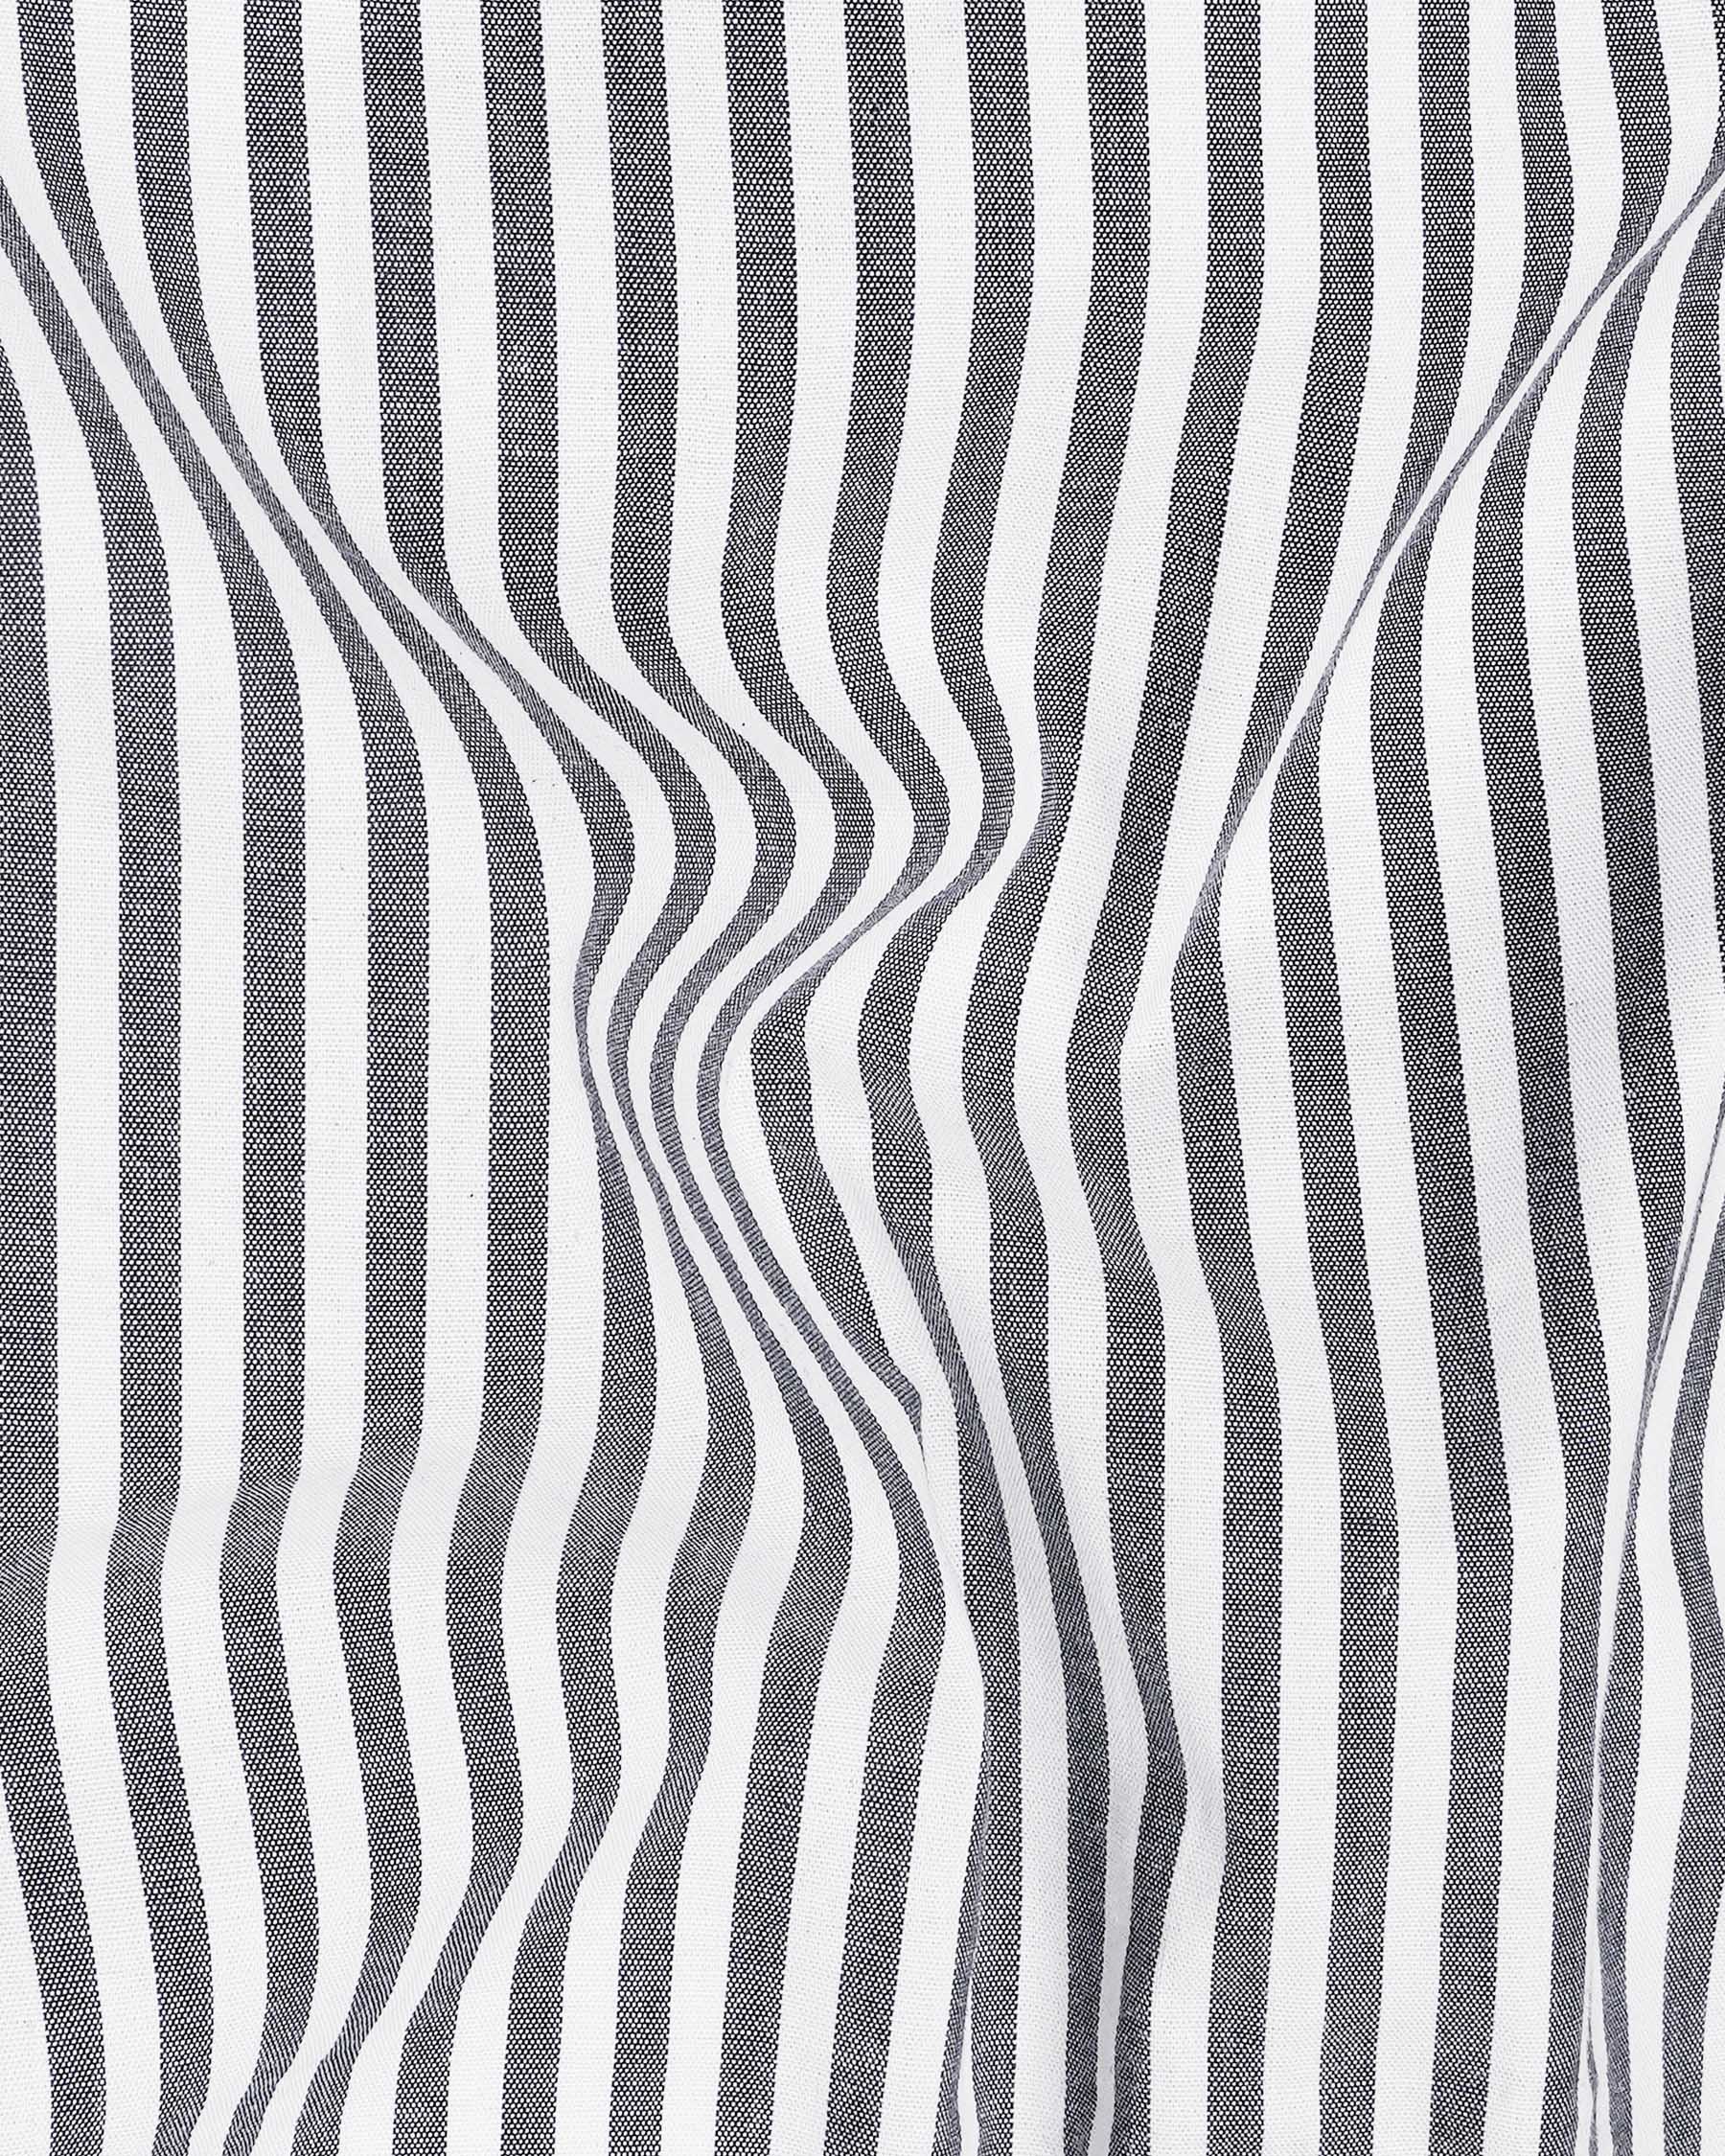 Dolphin Gray and White Striped Premium Cotton Shirt 7966-38, 7966-H-38, 7966-39, 7966-H-39, 7966-40, 7966-H-40, 7966-42, 7966-H-42, 7966-44, 7966-H-44, 7966-46, 7966-H-46, 7966-48, 7966-H-48, 7966-50, 7966-H-50, 7966-52, 7966-H-52